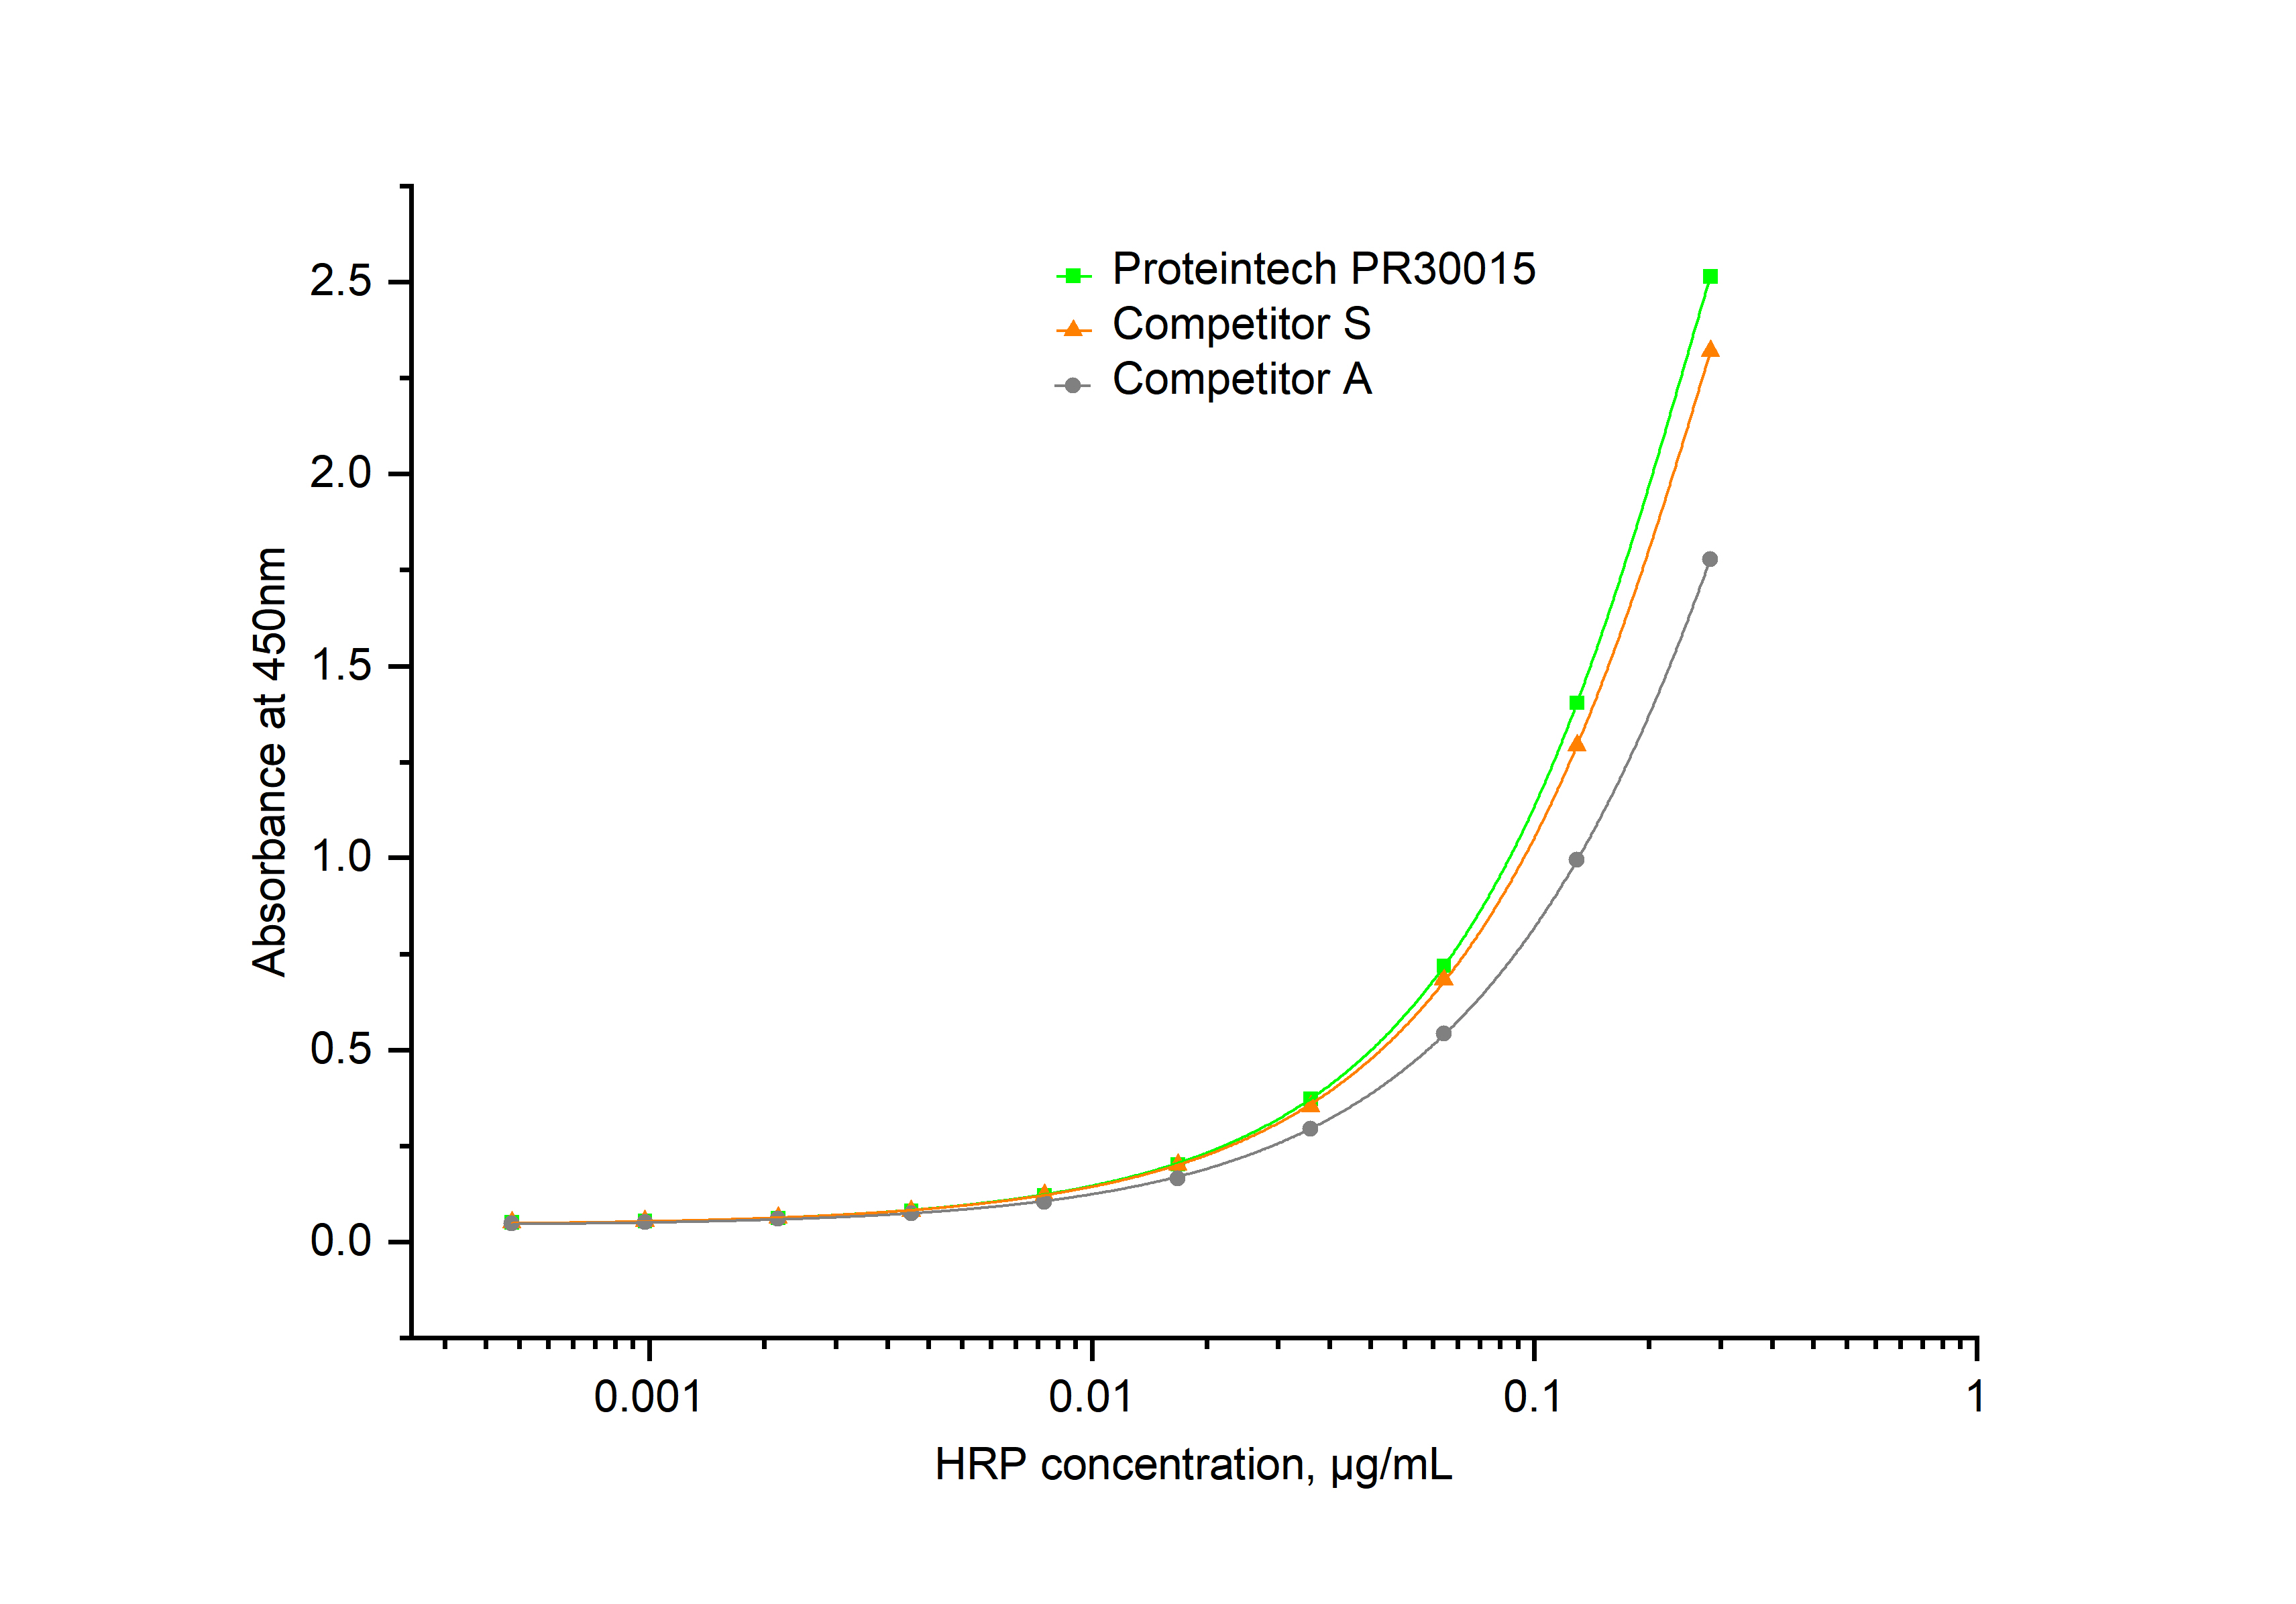 Reaction of TMB substrate with hydrogen peroxide catalyzed by Proteintech HRP (PR30015) and competitors' HRP respecitively. The reaction was stopped by H2SO4 followed by absorbance measurement at 405 nm. Signal from Proteintech PR30015 is higher than competitor's, thus the enyzyme activity is higher.